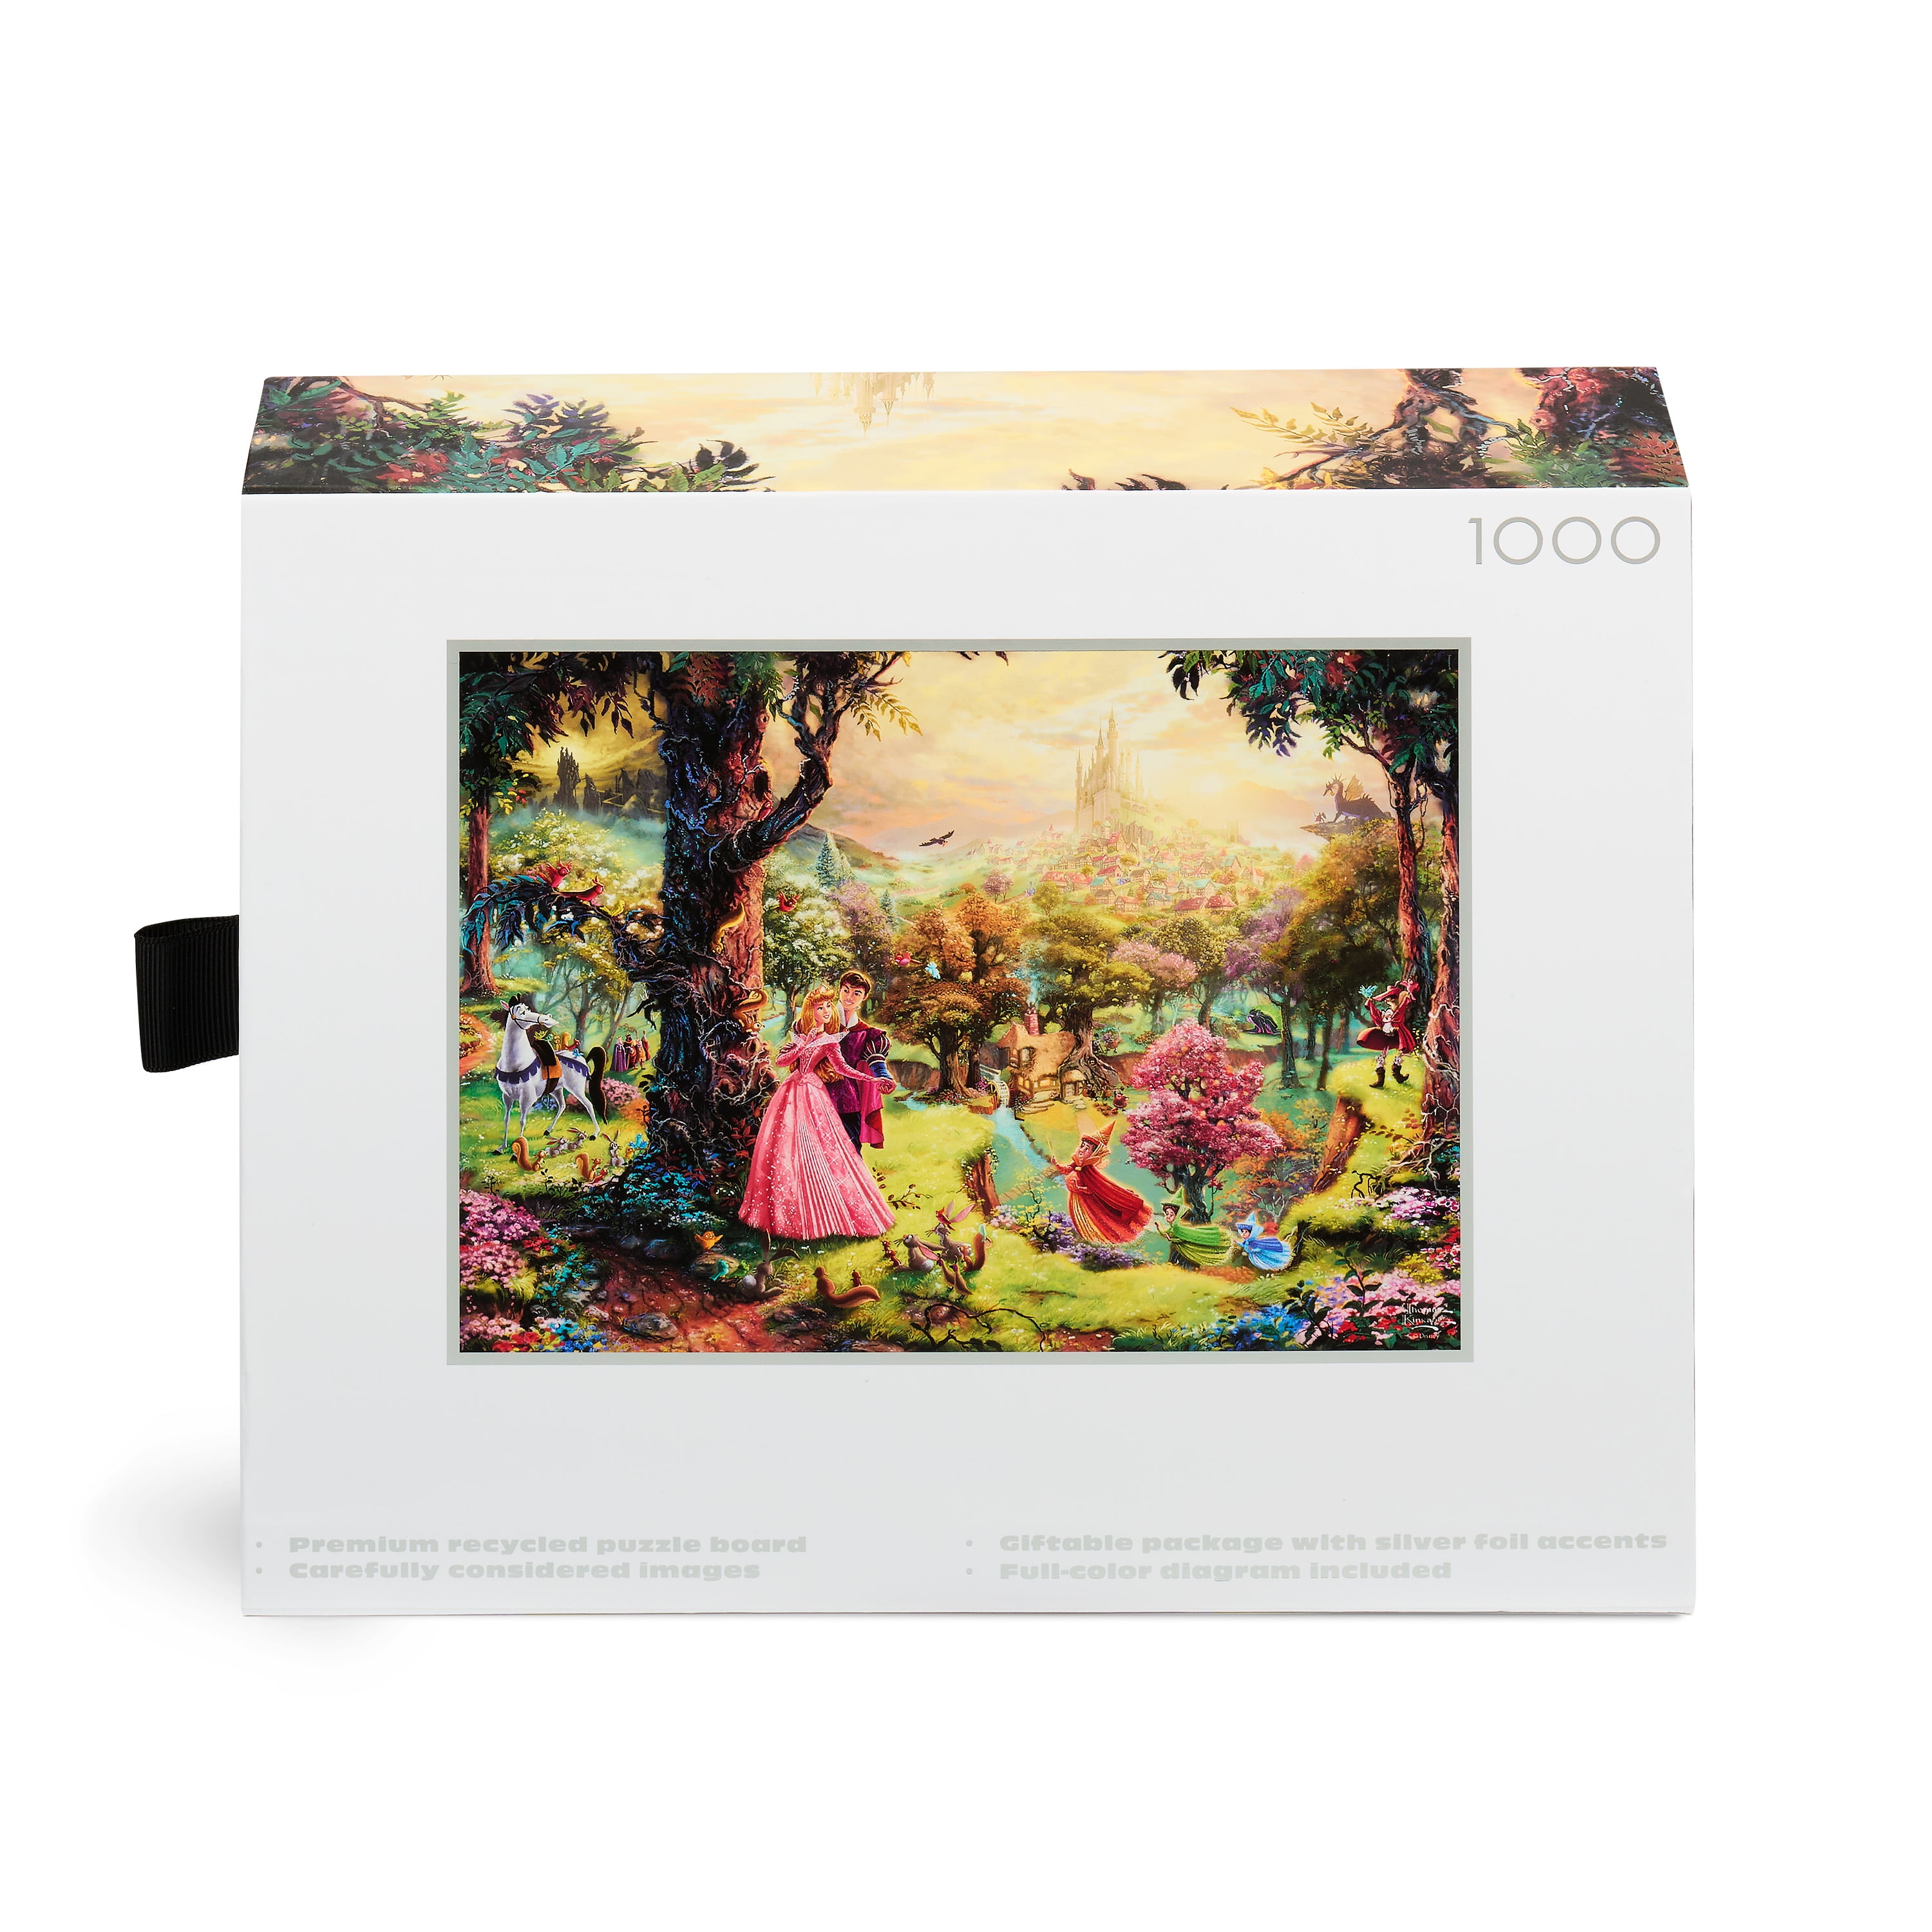 Ceaco - Silver Select - Disney - Thomas Kinkade - Maleficent - 1000 Piece  Jigsaw Puzzle for Adults Challenging Puzzle Perfect for Game Nights